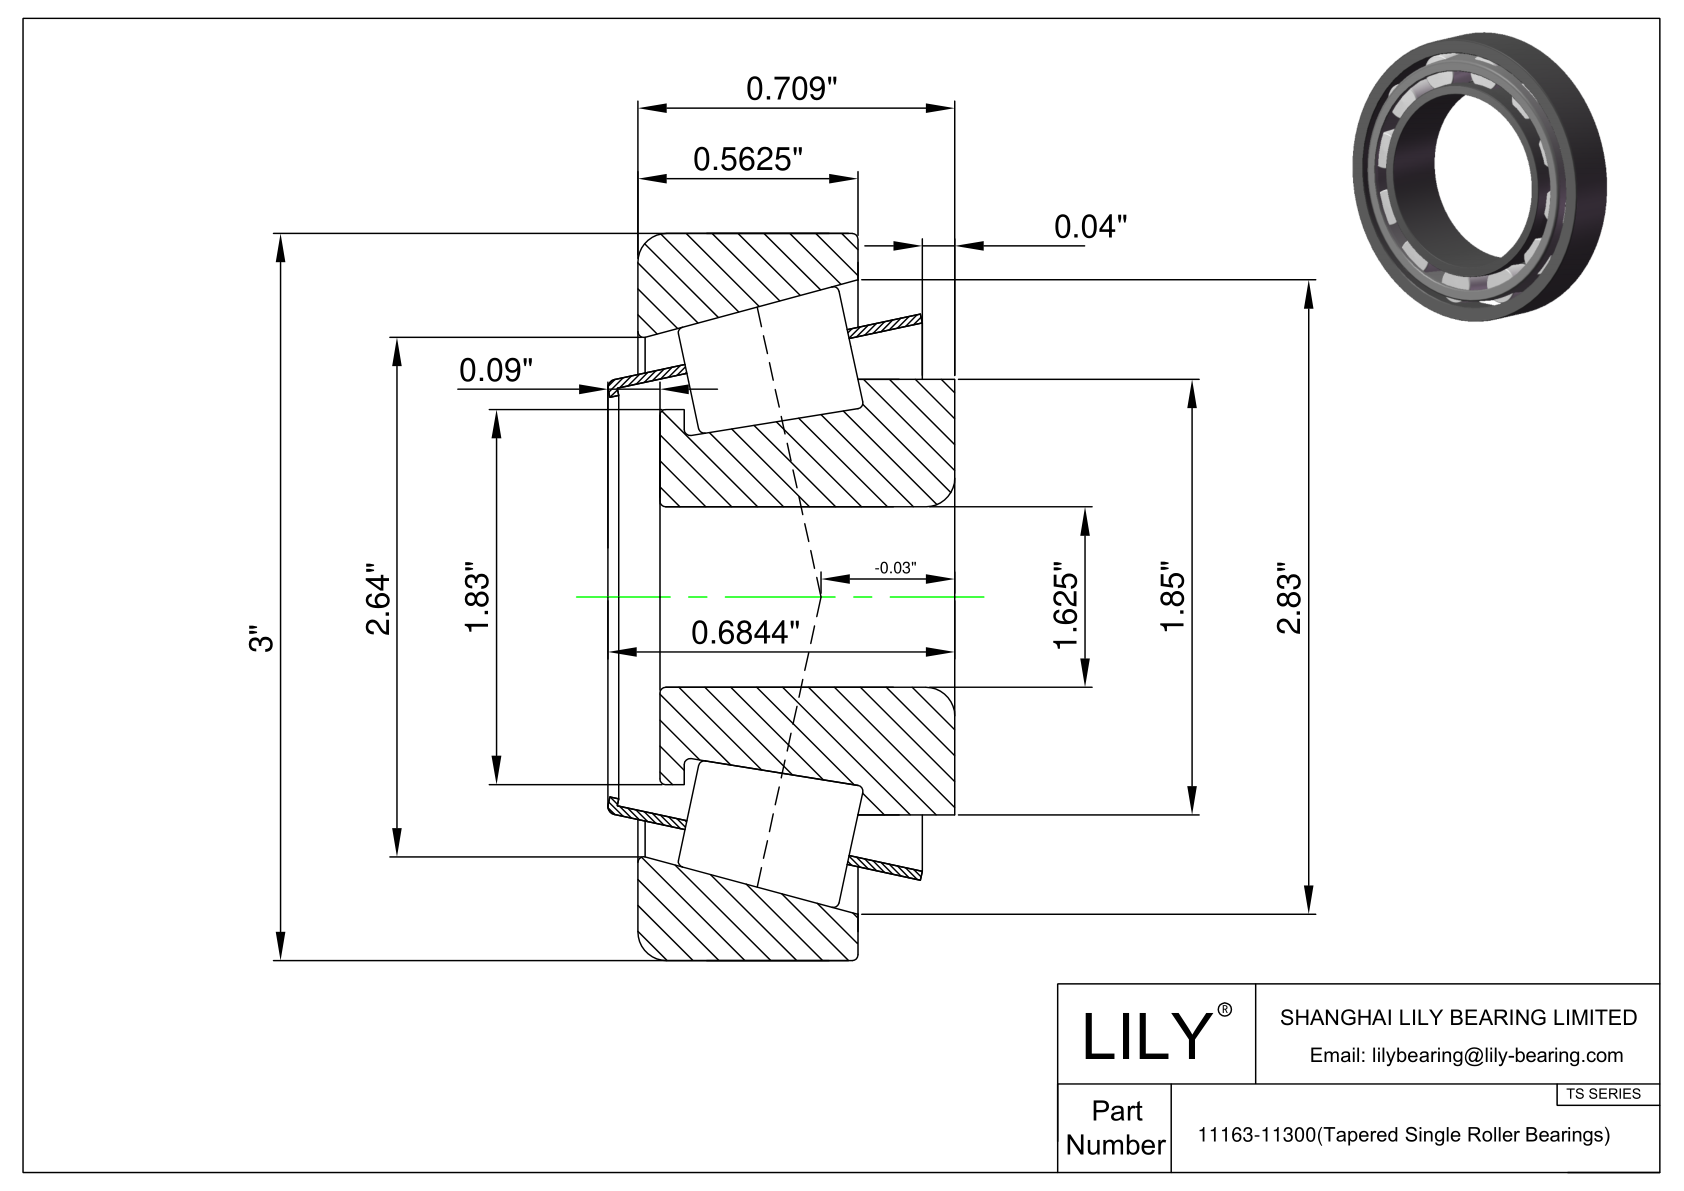 11163-11300 TS (Tapered Single Roller Bearings) (Imperial) cad drawing